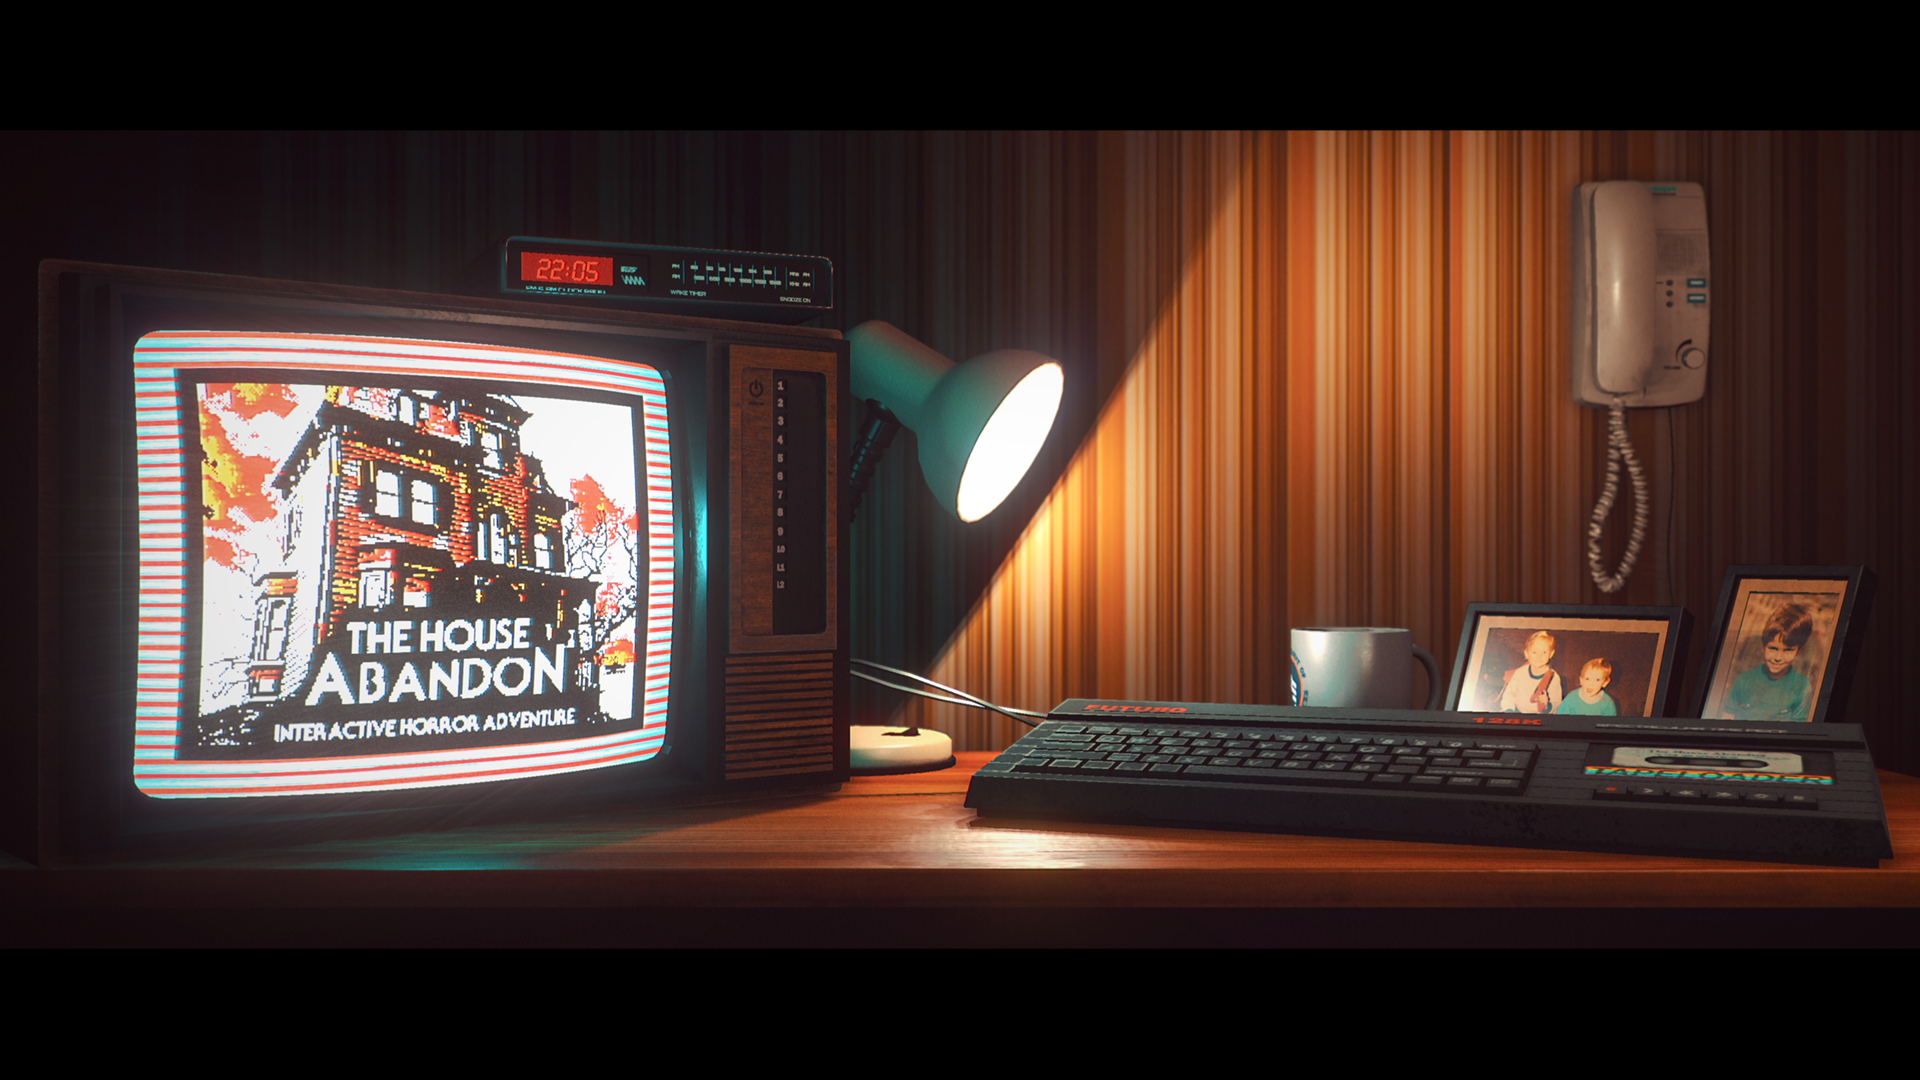 Best retro games: Stories Untold. Image shows an image of a desktop with a keyboard, lamp, photos, a mug, and a monitor showing the title screen of 